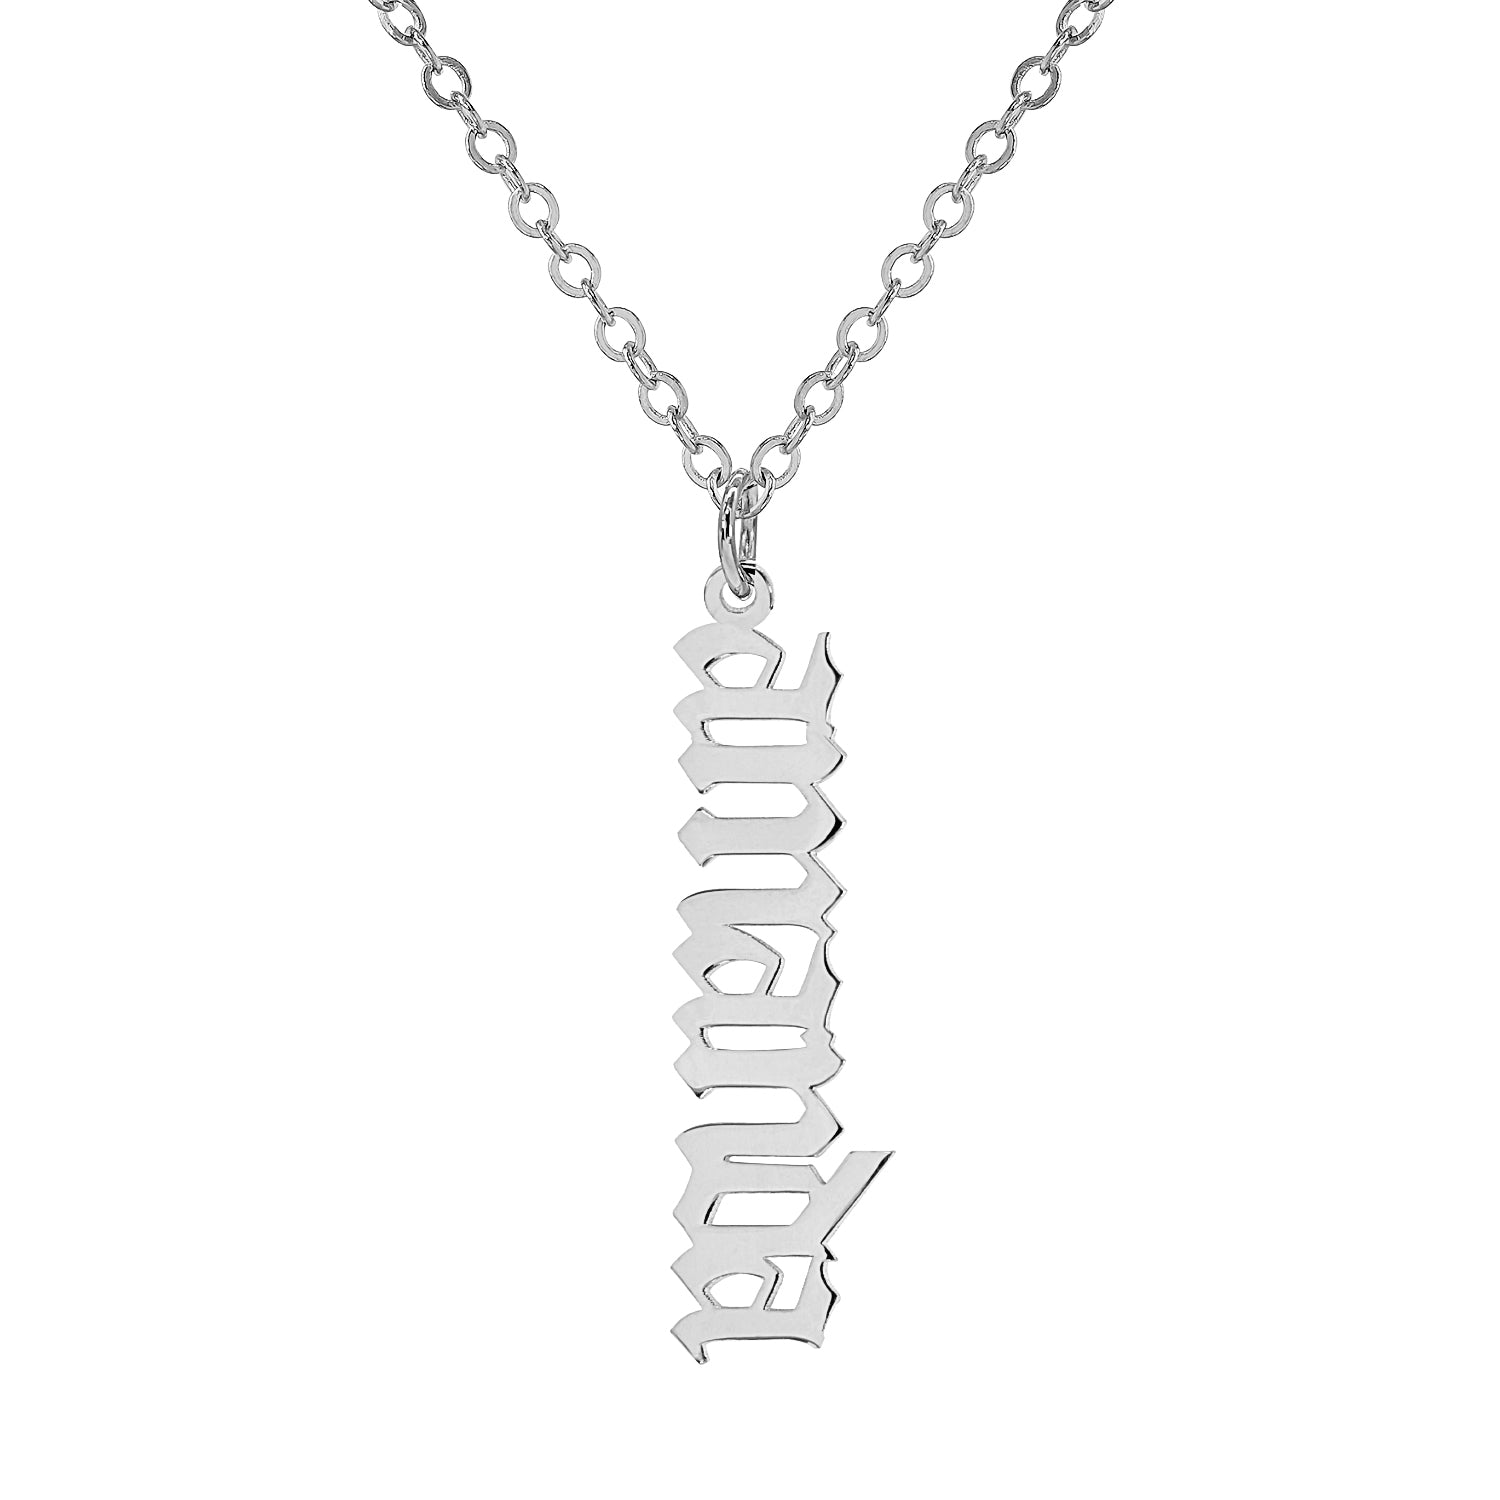 DROP DOWN GOTHIC NAME NECKLACE